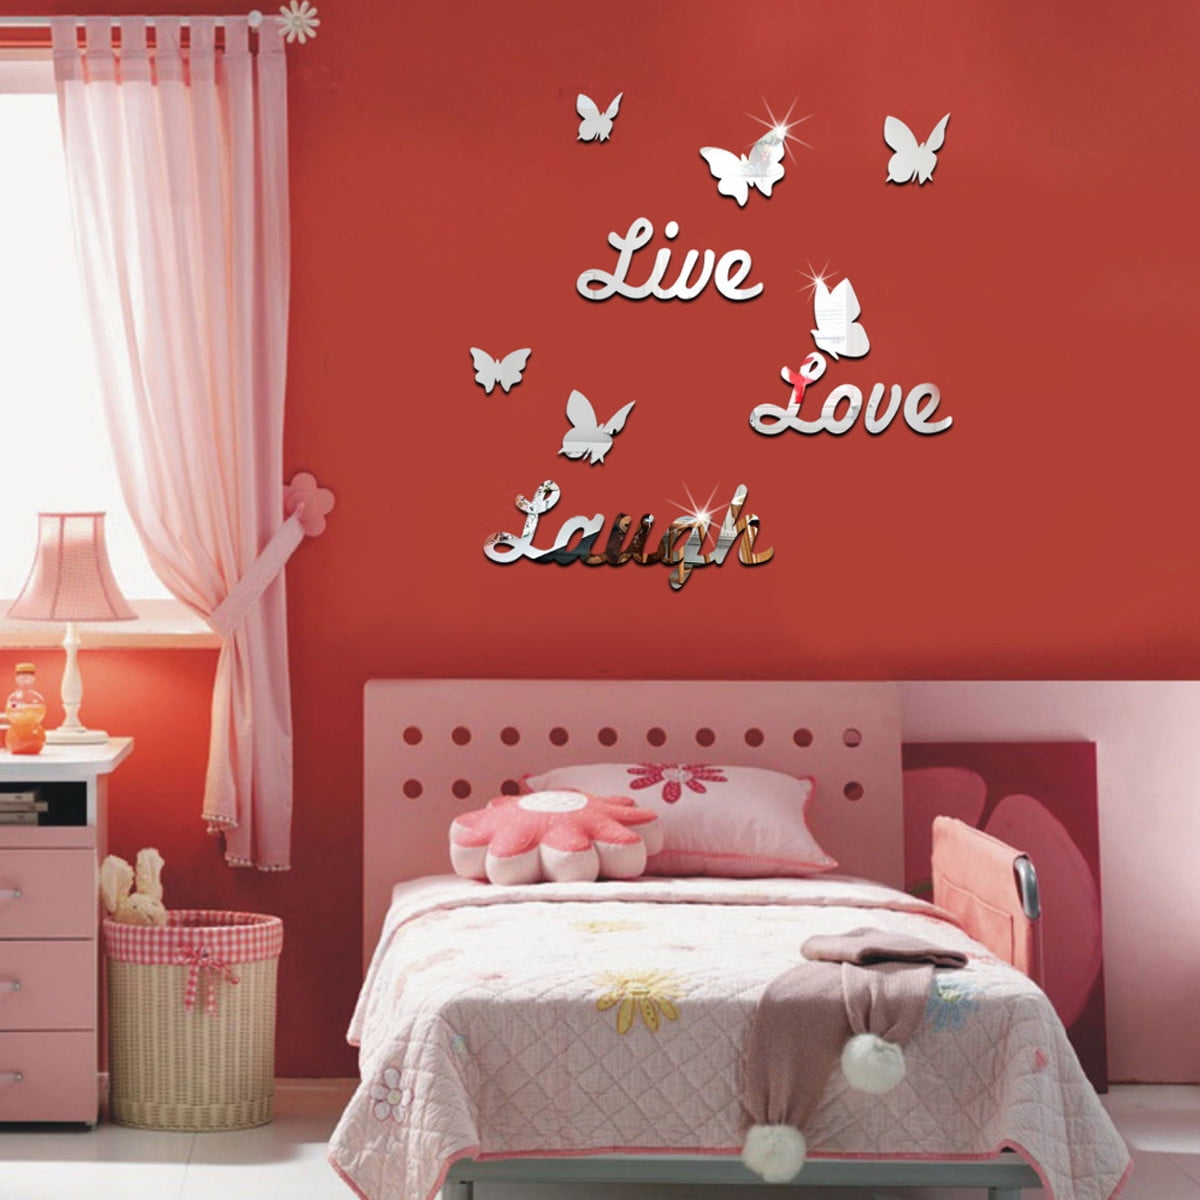 DIY Silver Love Live Laugh Heart Mirror Combination 3D Mirror Wall Stickers Home Decoration Silver Love Live Laugh Heart